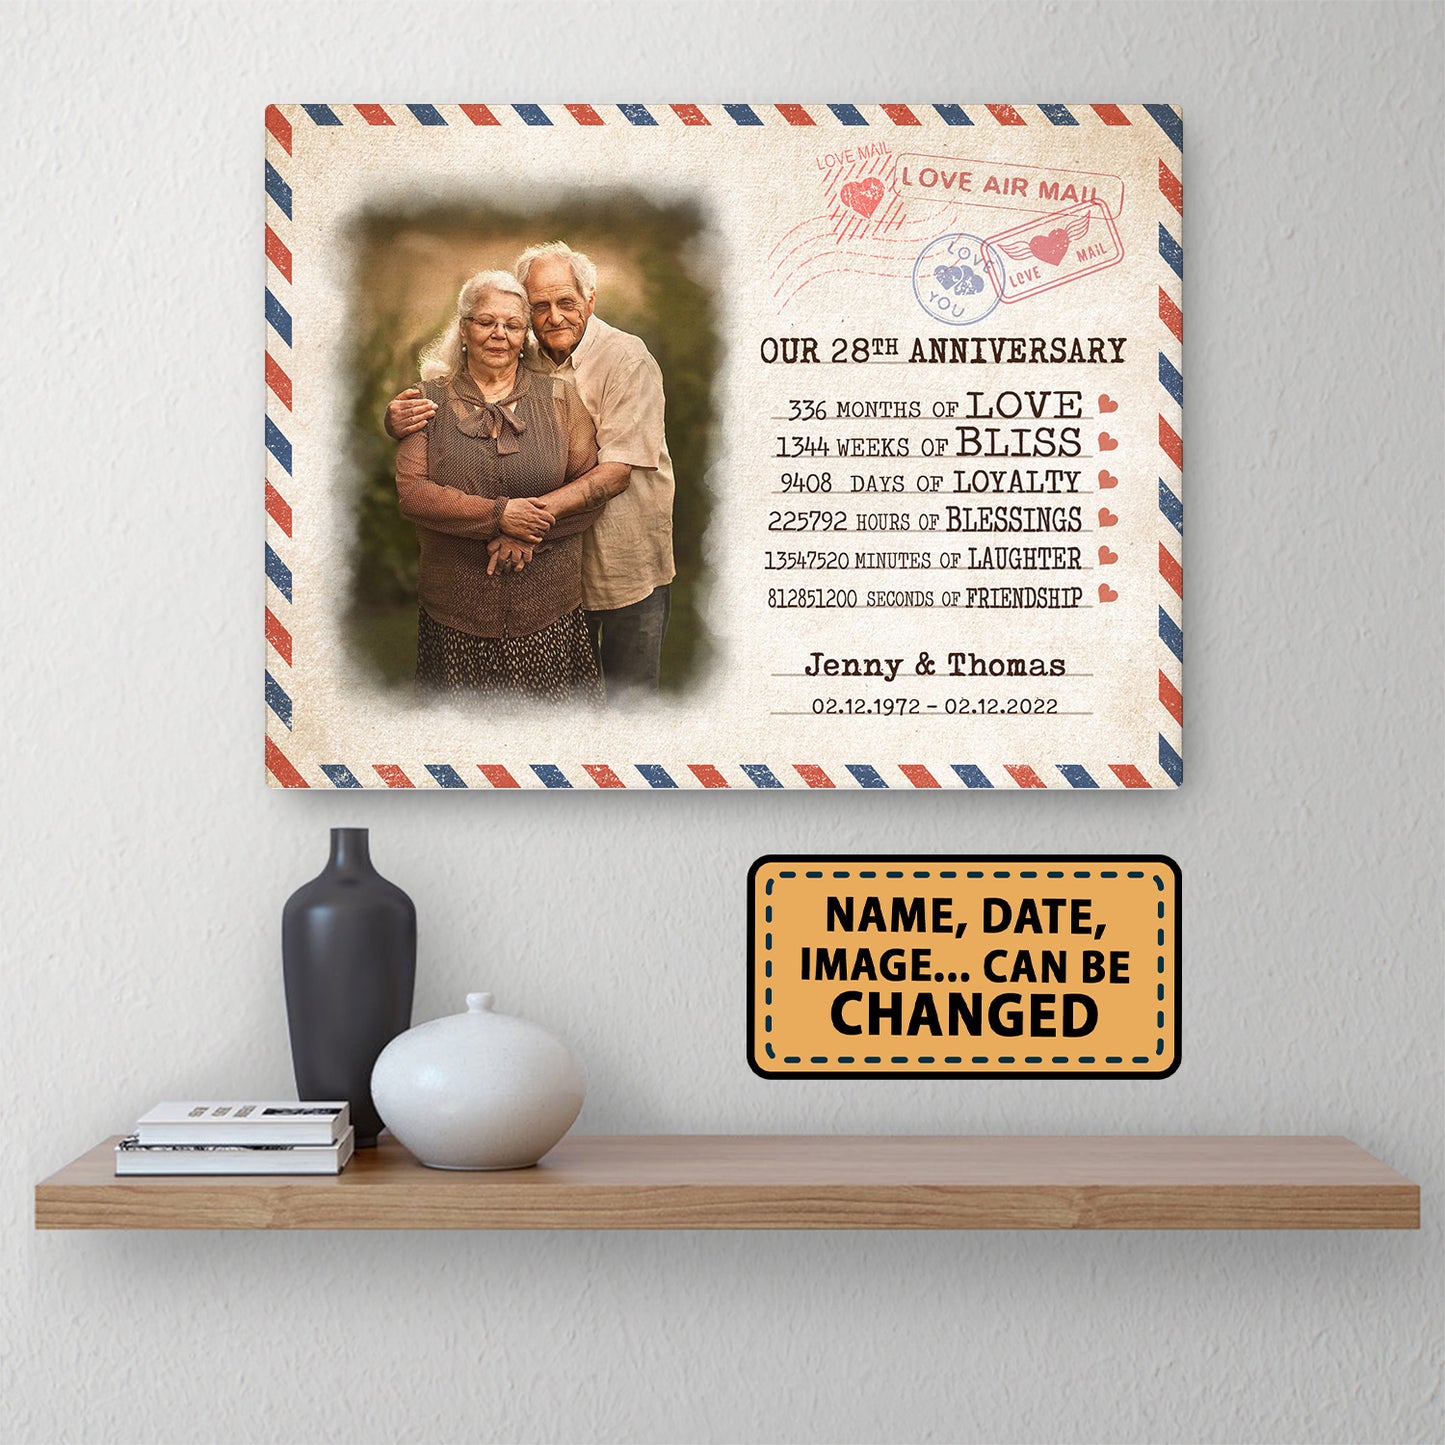 Our 28th Anniversary Letter Valentine Gift Personalized Canvas